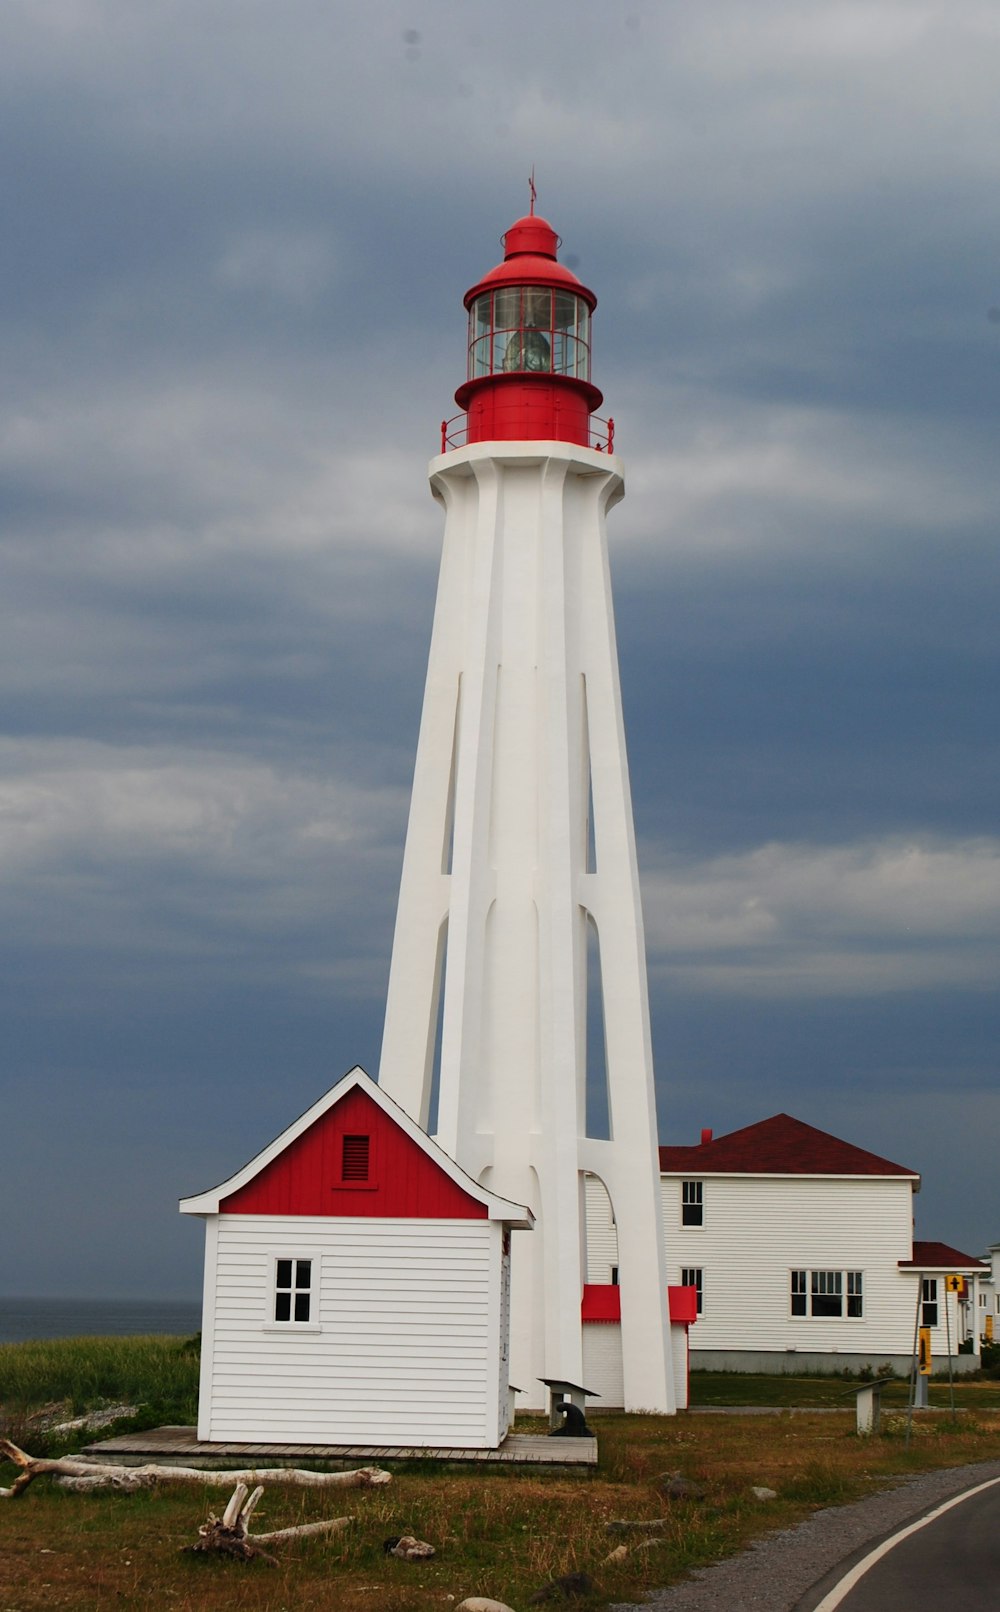 white and red lighthouse under cloudy sky during daytime